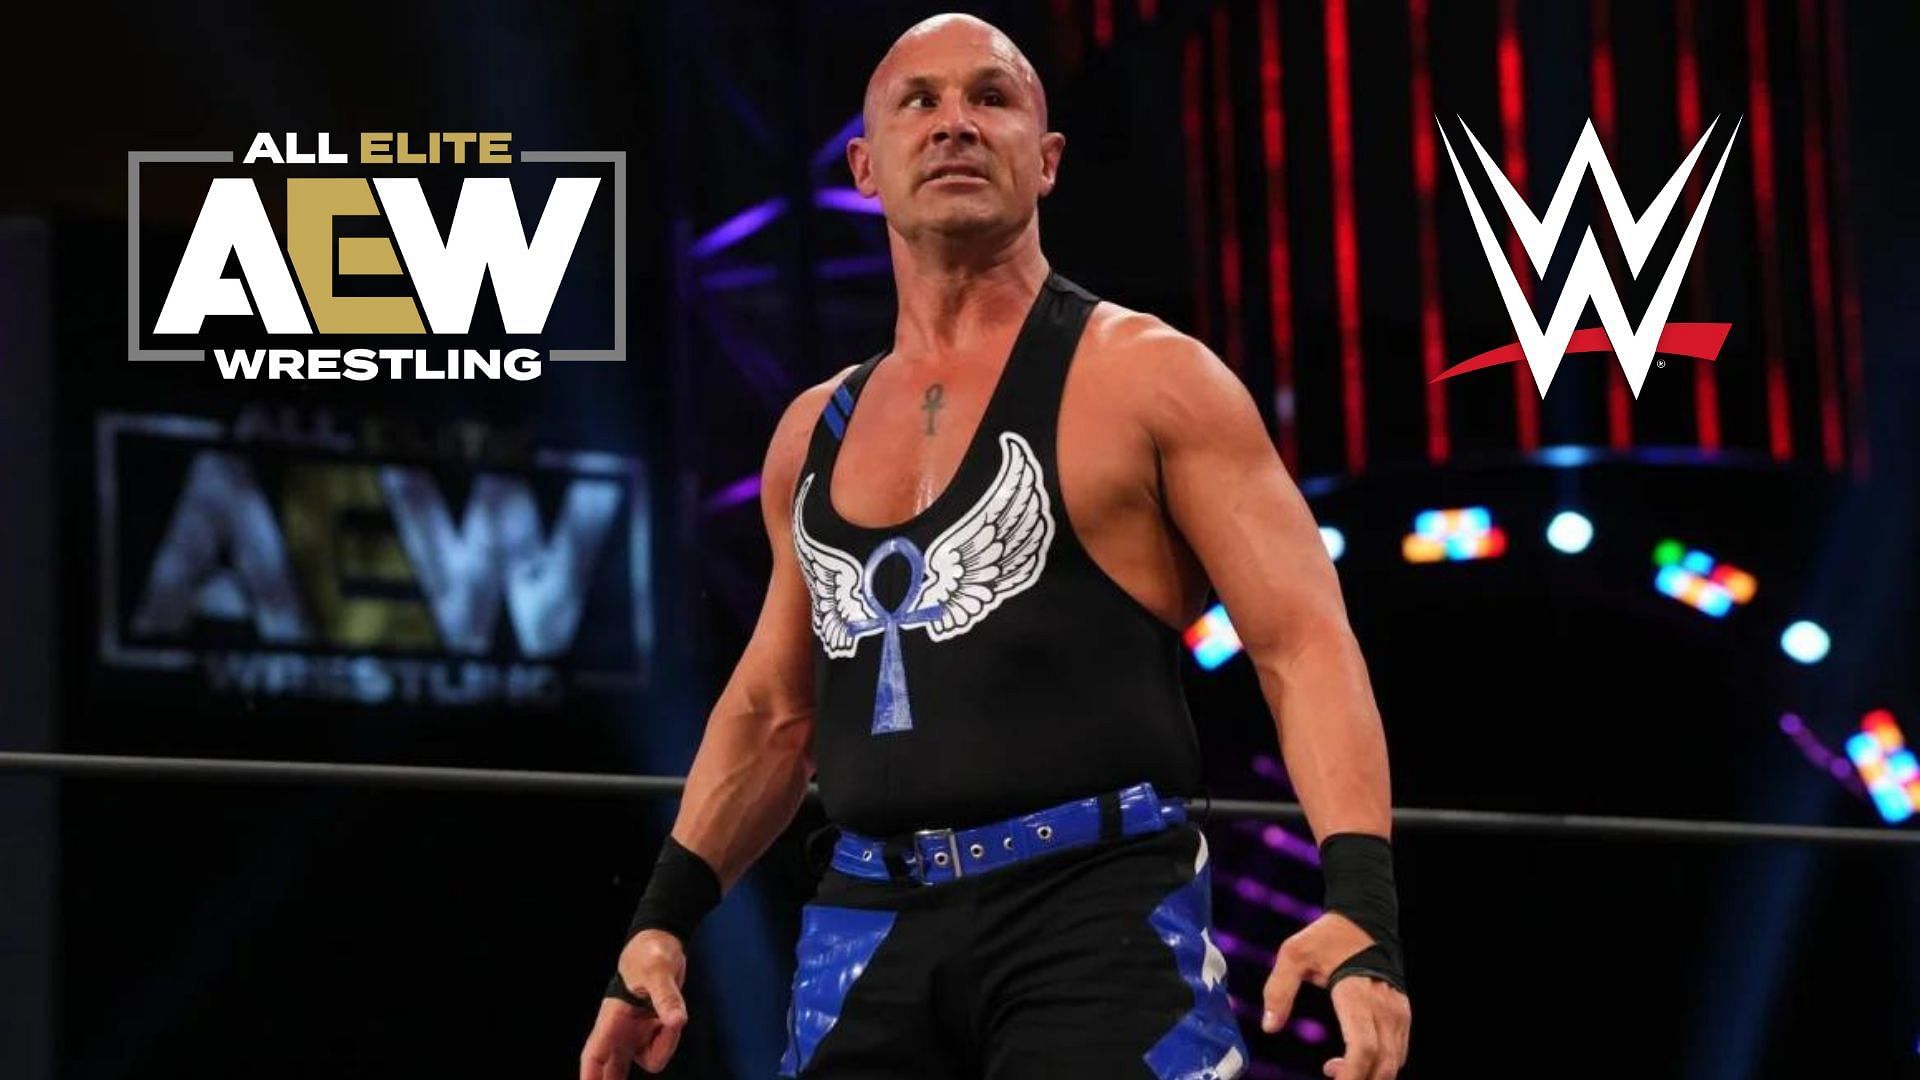 AEW star Christopher Daniels reunited with his former tag team partner